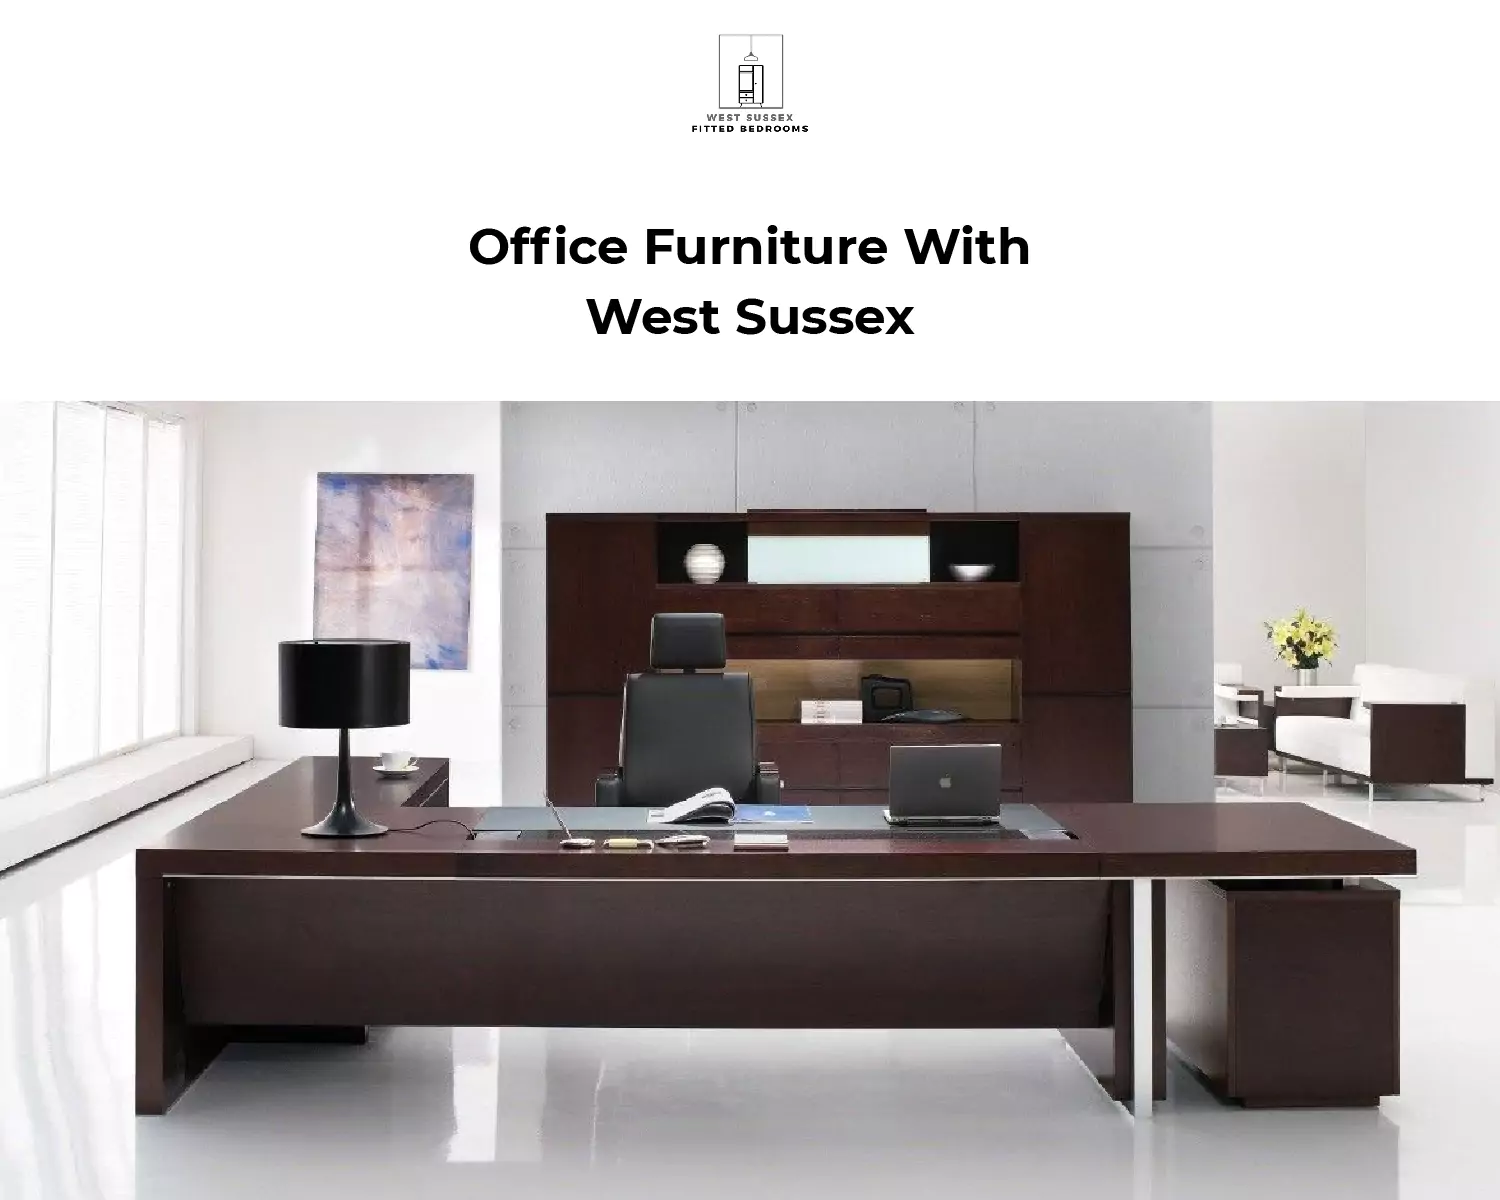 Office Furniture With West Sussex